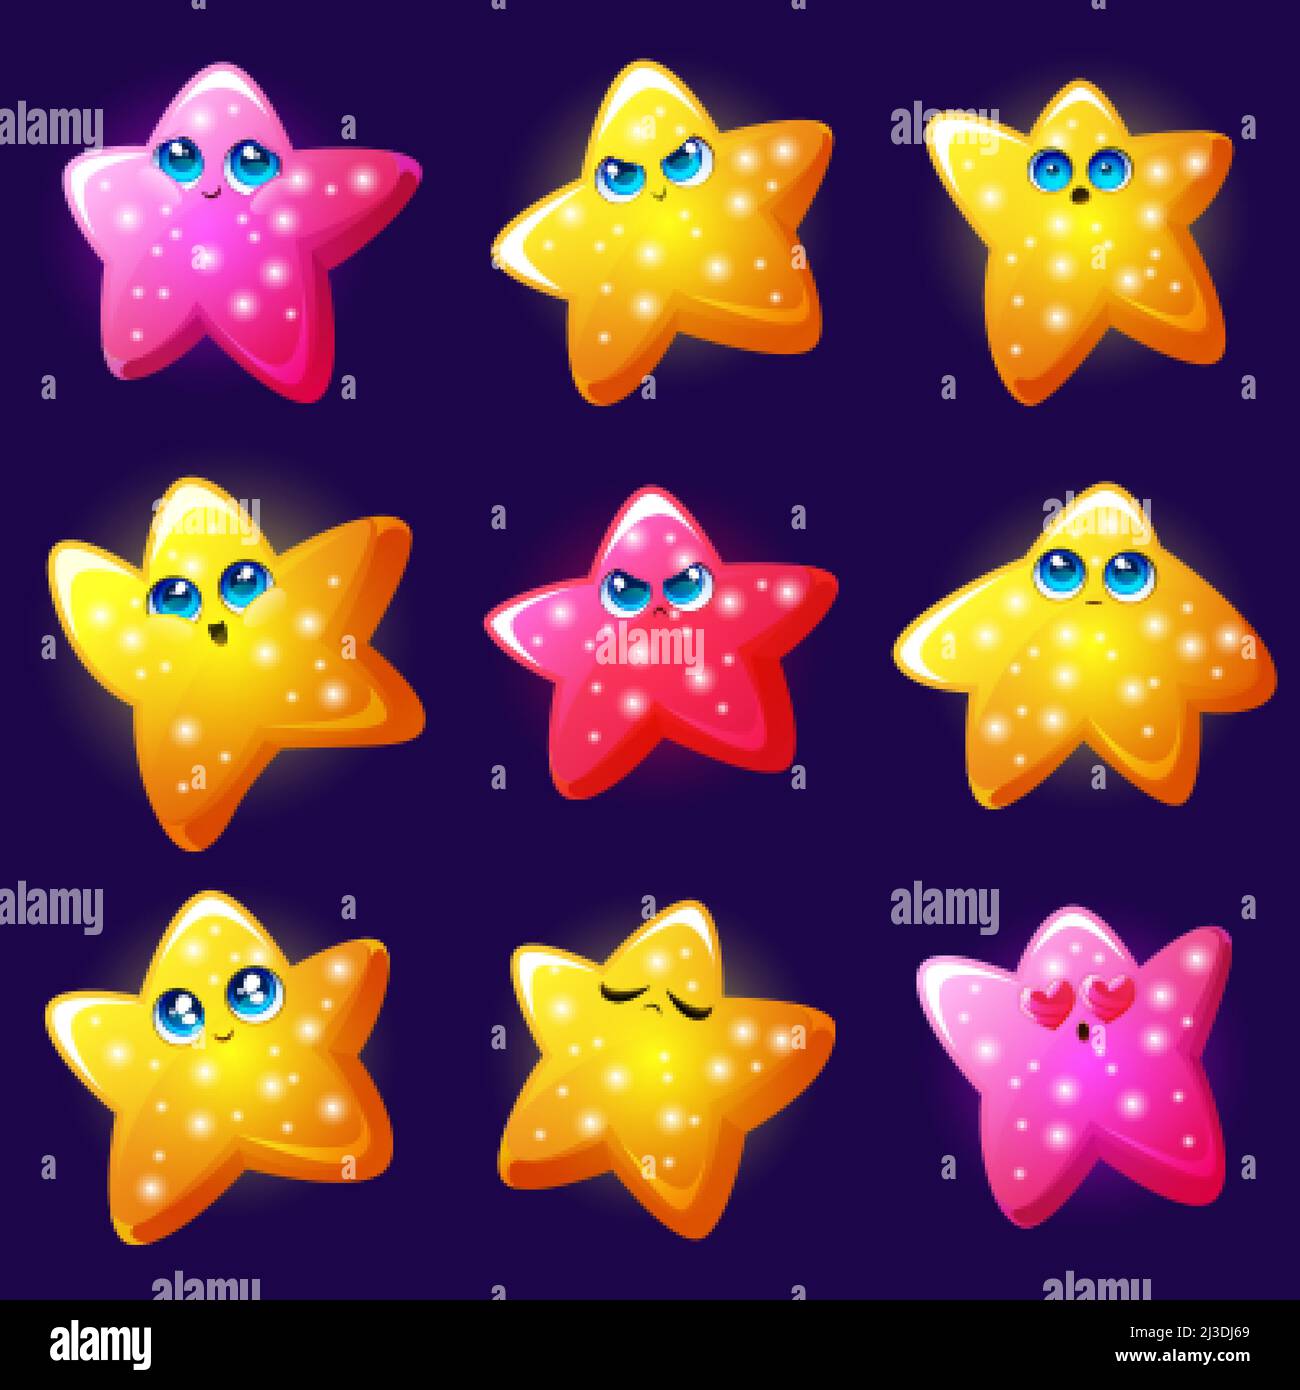 Cute star emoji, gold shiny faces with different emotions isolated ...